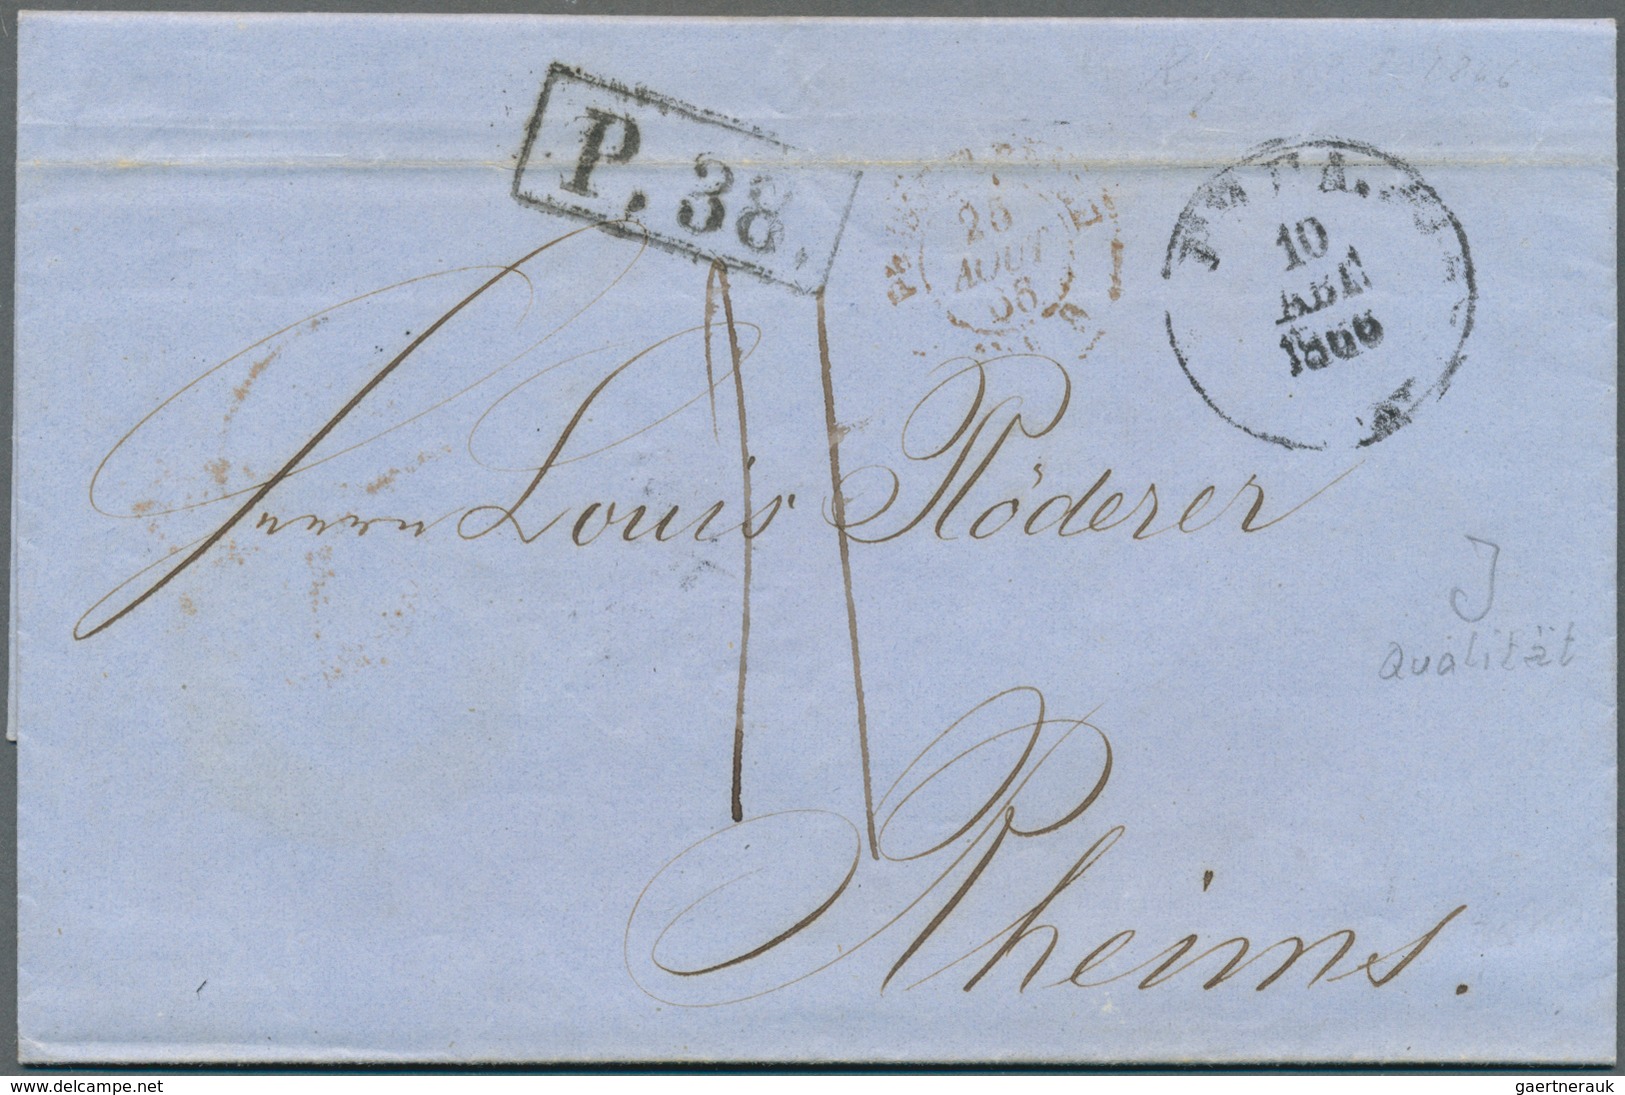 Russland: 1859/1866, six letter sent from RIGA to the Champain dealer "Roederer" in Reims with pruss